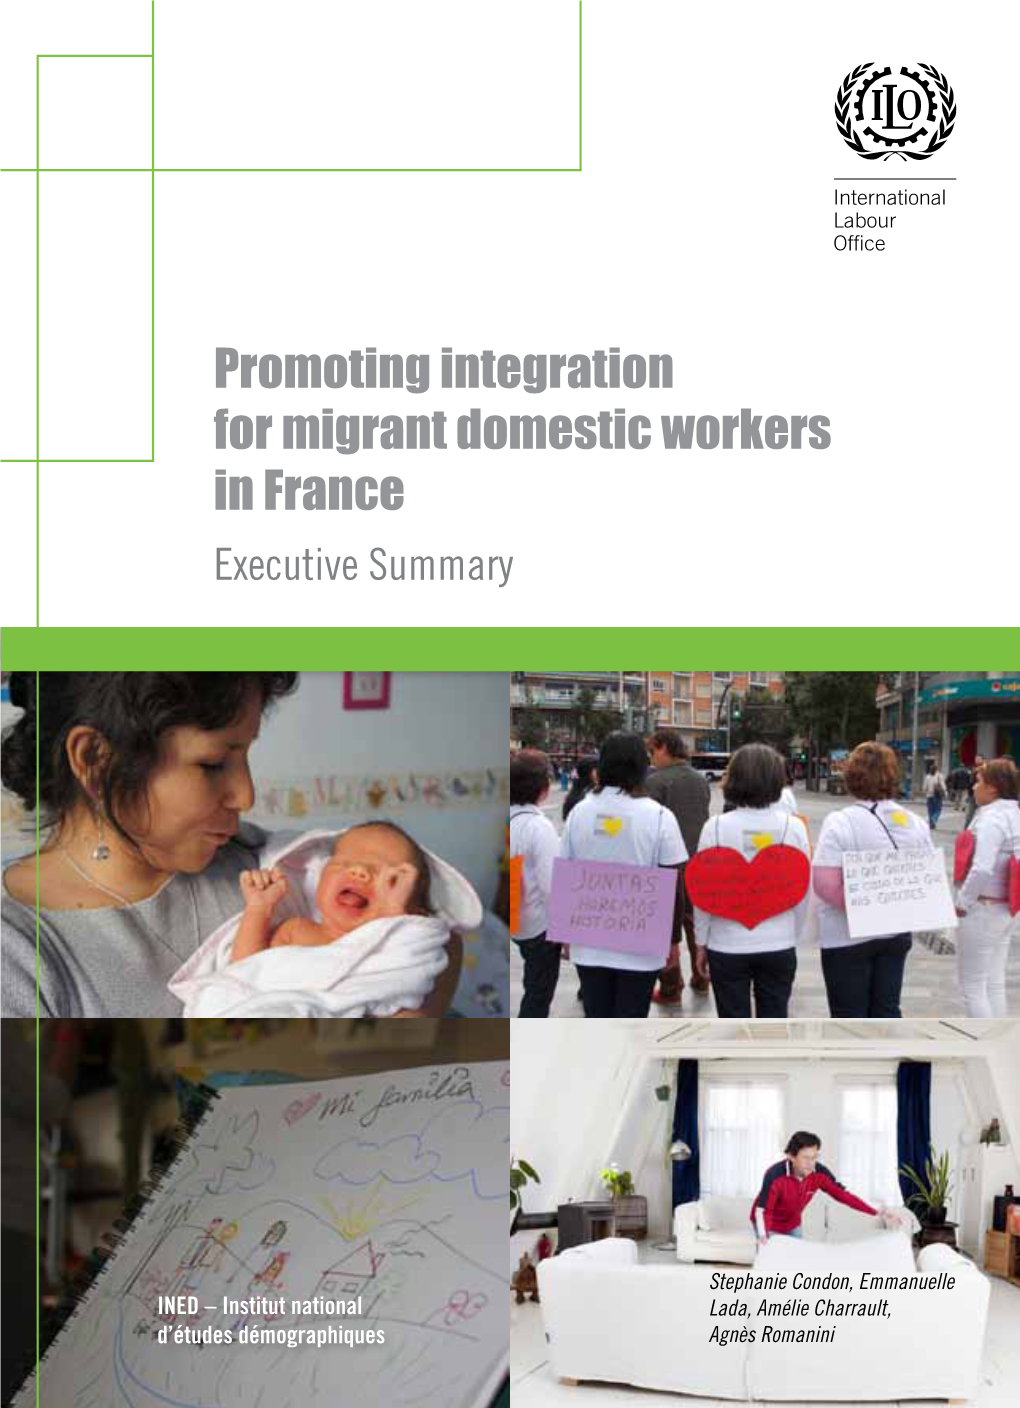 Promoting Integration for Migrant Domestic Workers in France